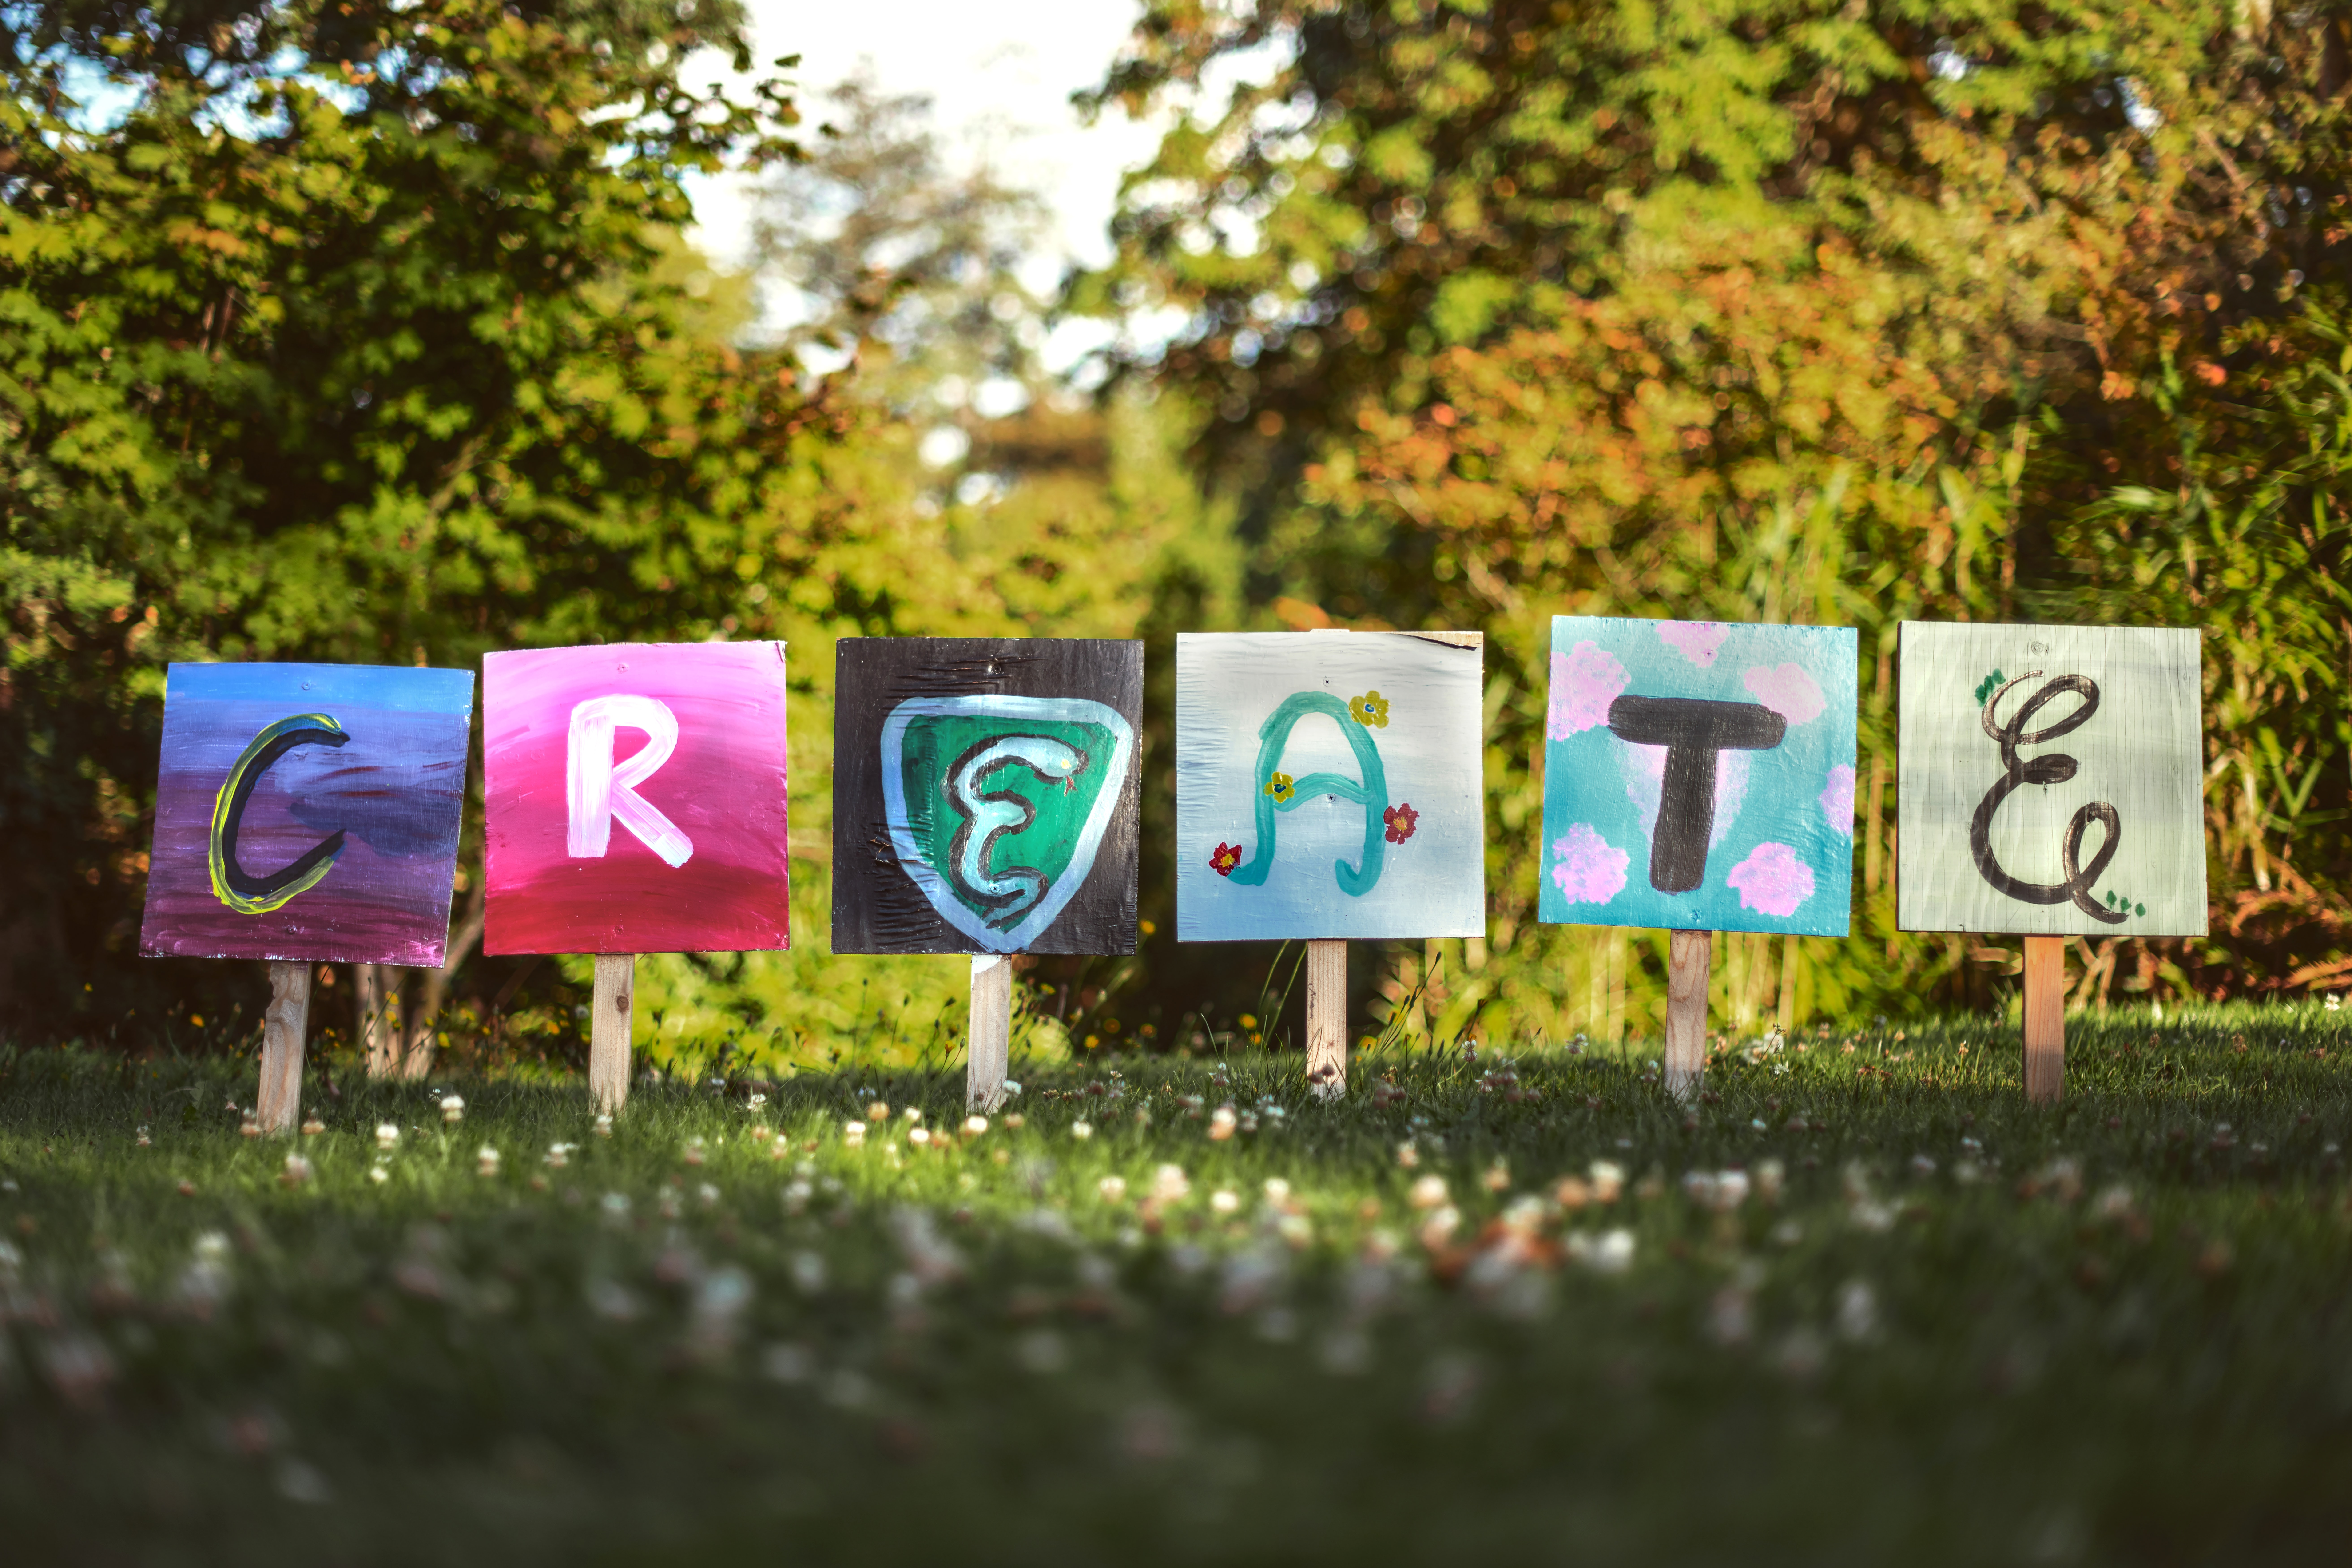 Colourful signs in a rural setting spelling out The word 'Create'.